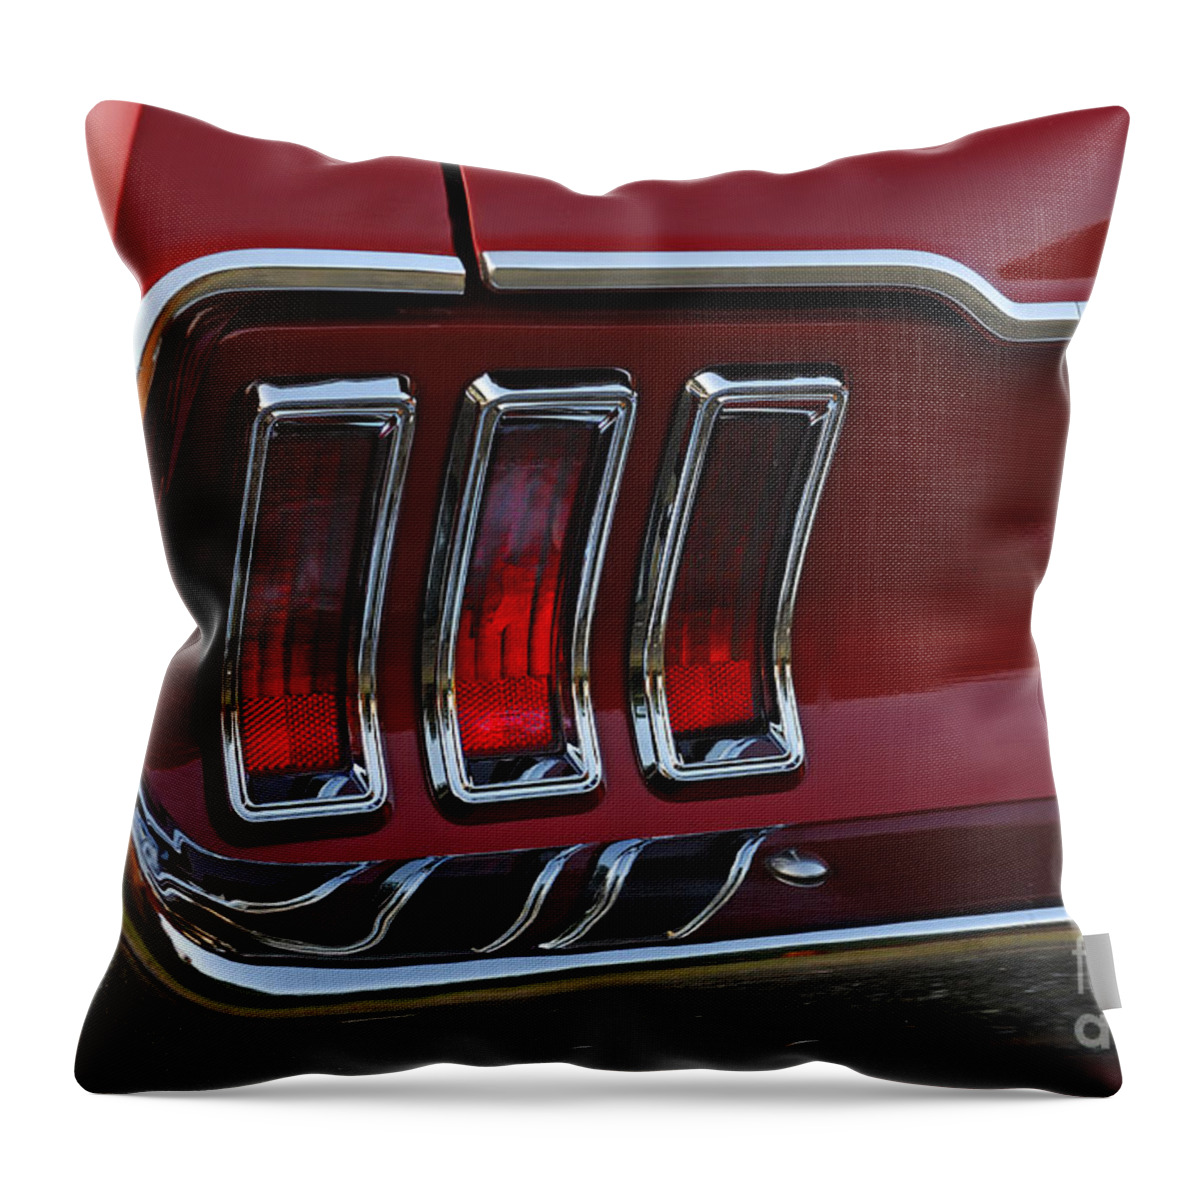 Vintage Throw Pillow featuring the photograph Vintage Ford Mustang Taillight by Helmut Meyer zur Capellen